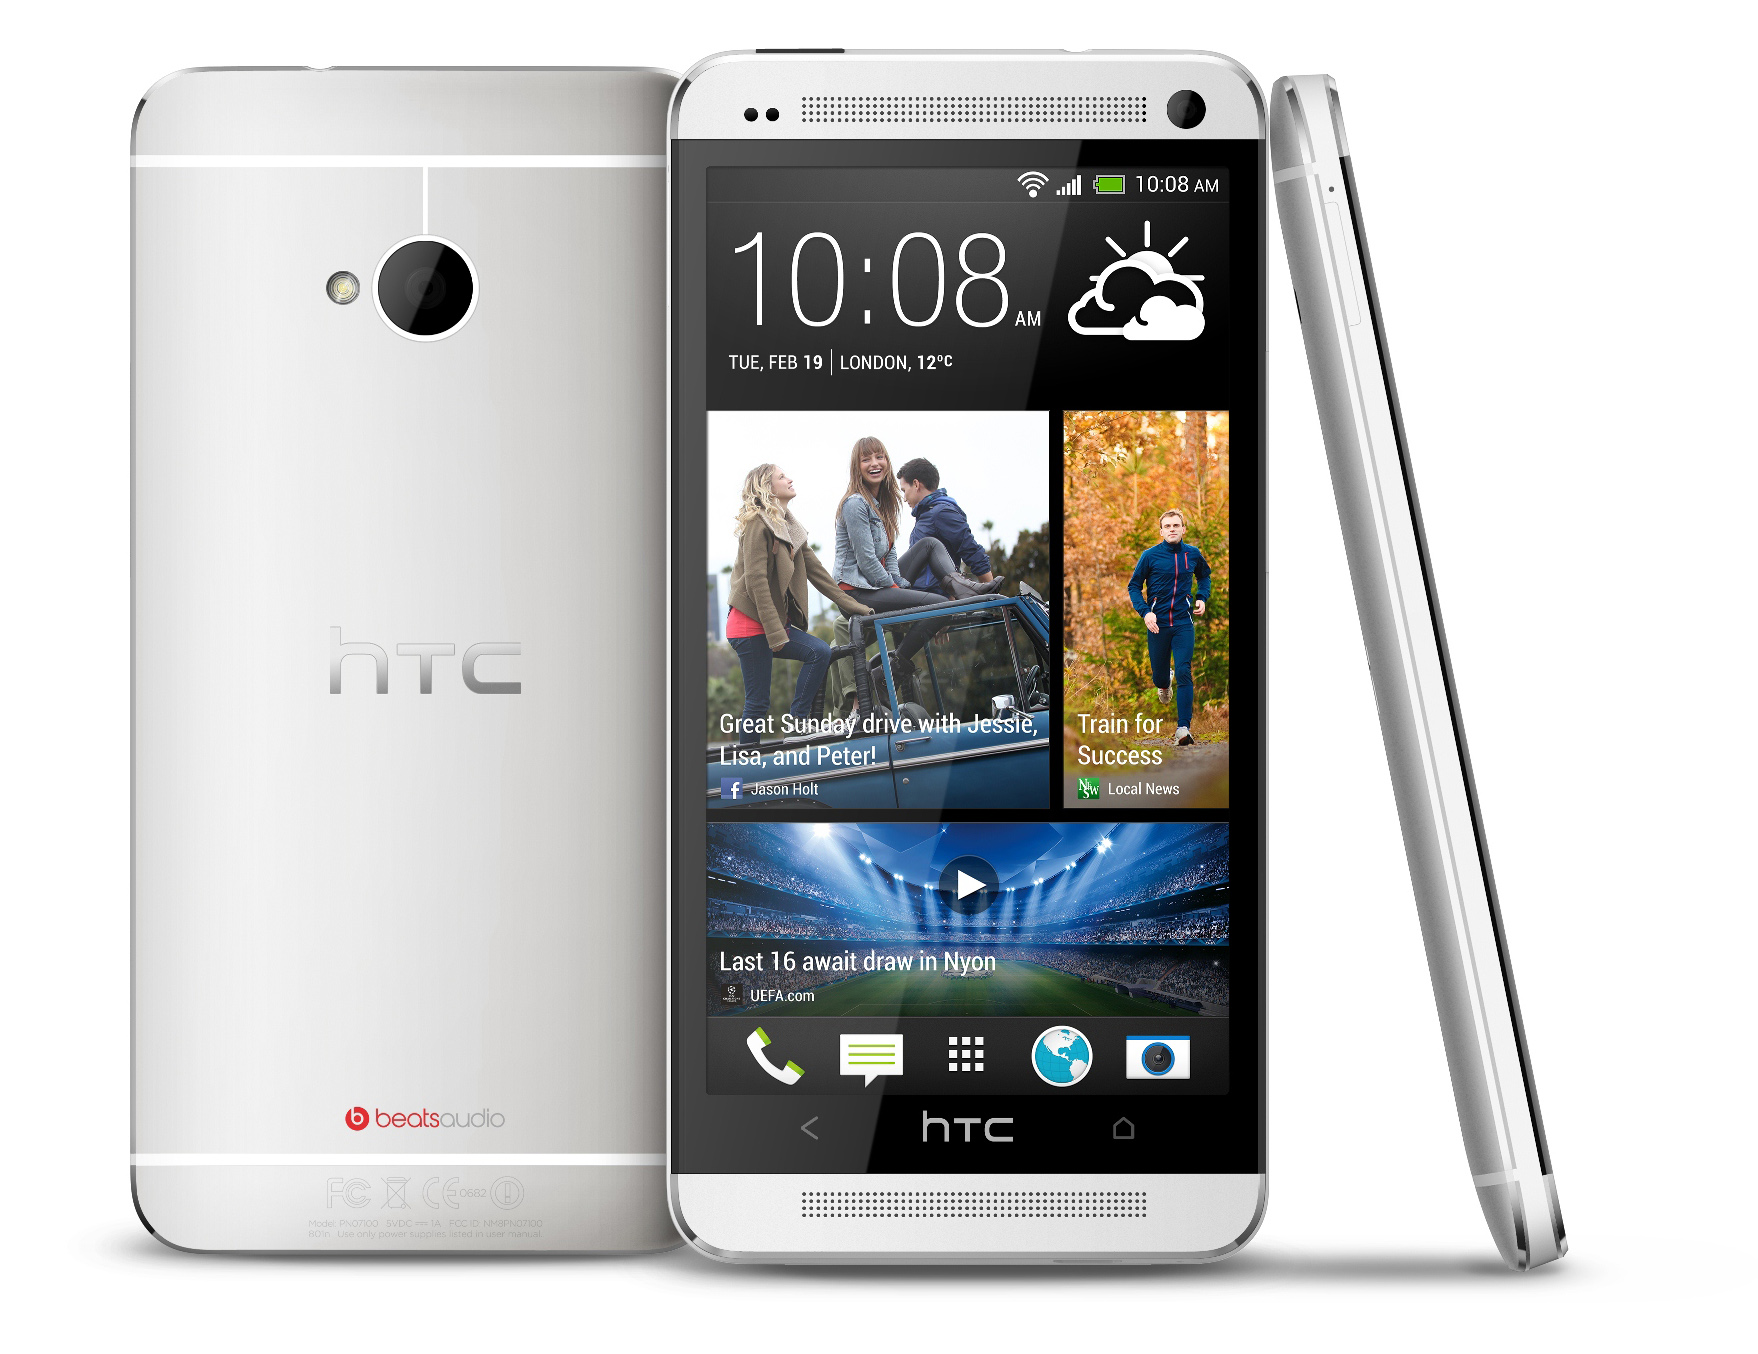 http://images.anandtech.com/doci/6754/HTC%20One_Silver_3V.jpg